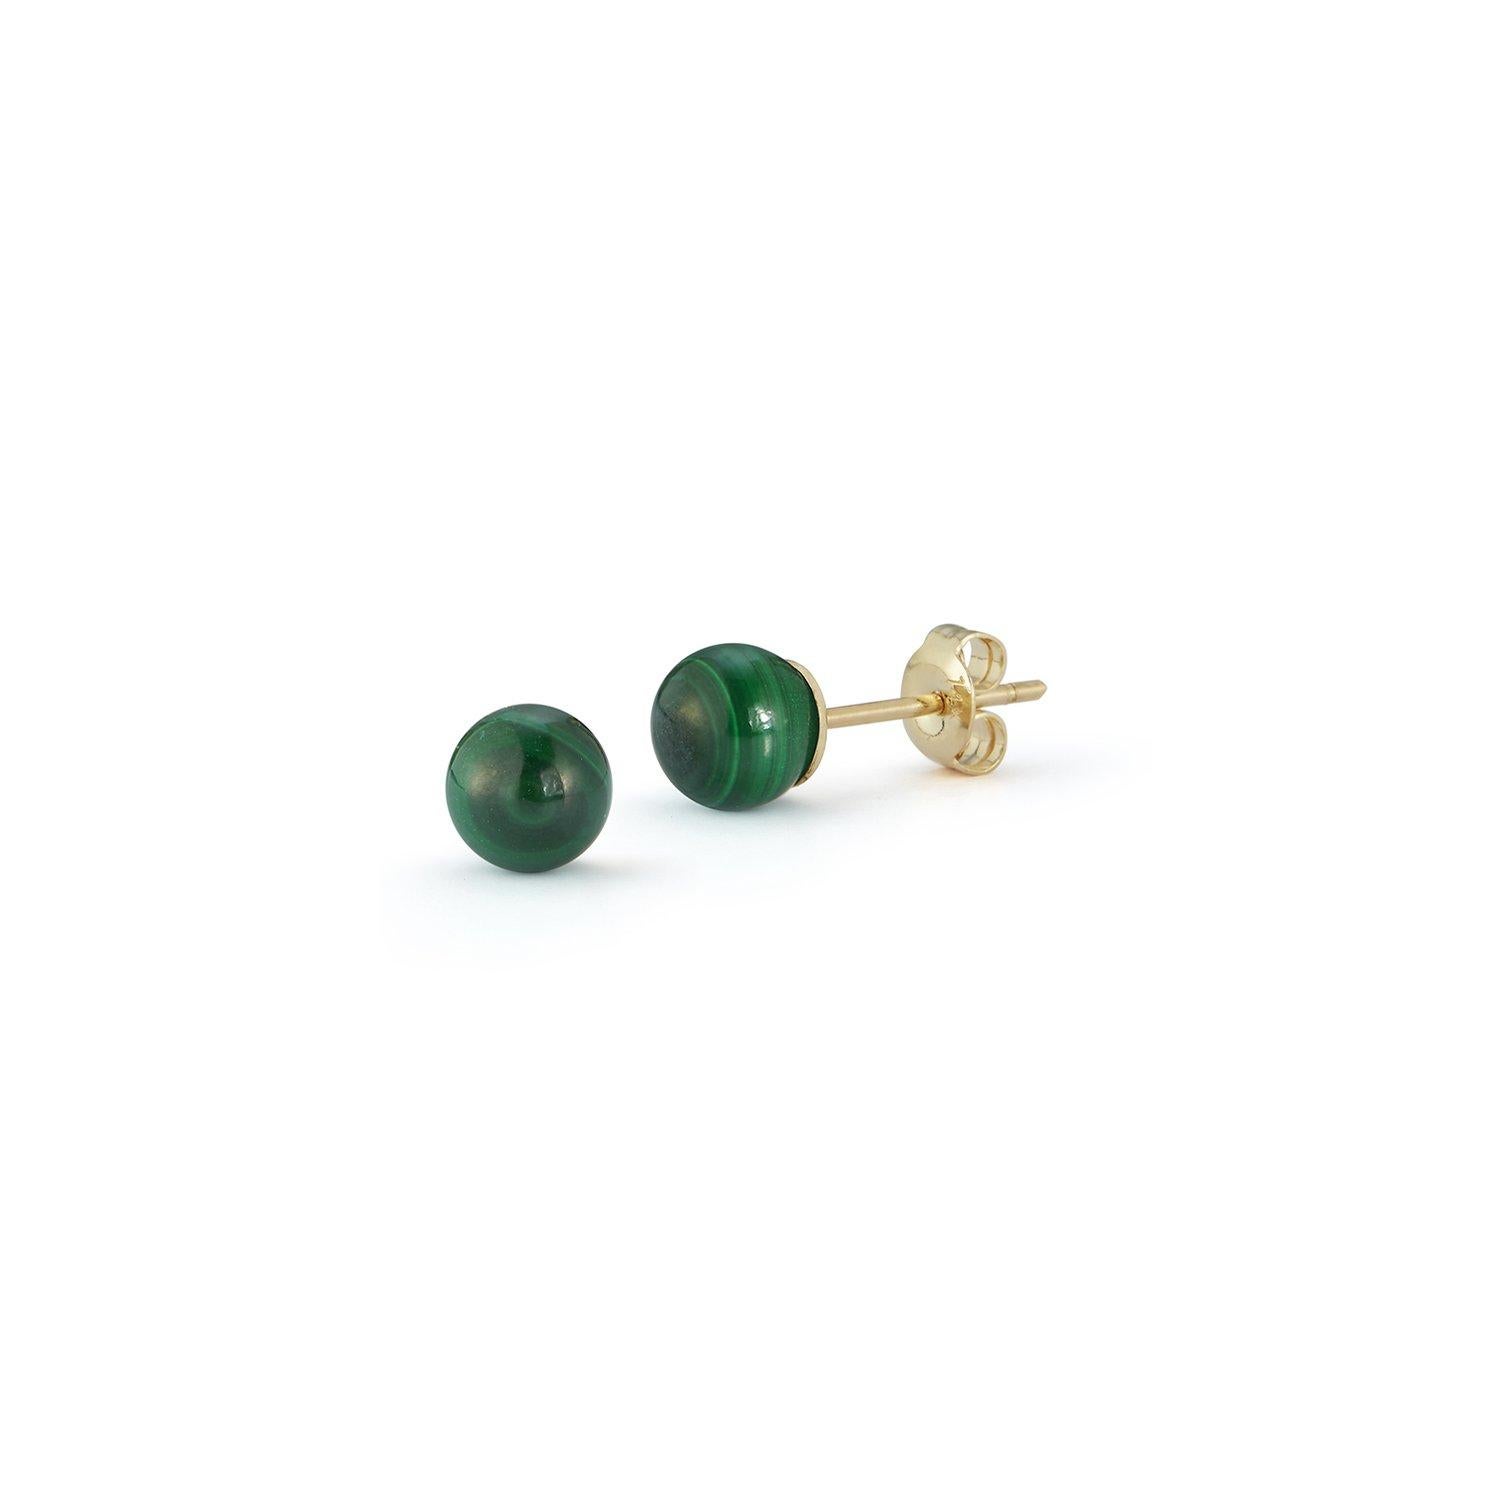 A timeless classic, our malachite studs are a must have and the perfect way to add a bit of color. Made in New York of solid 14kt Gold and natural vivid green malachite with incredible marbling.  
